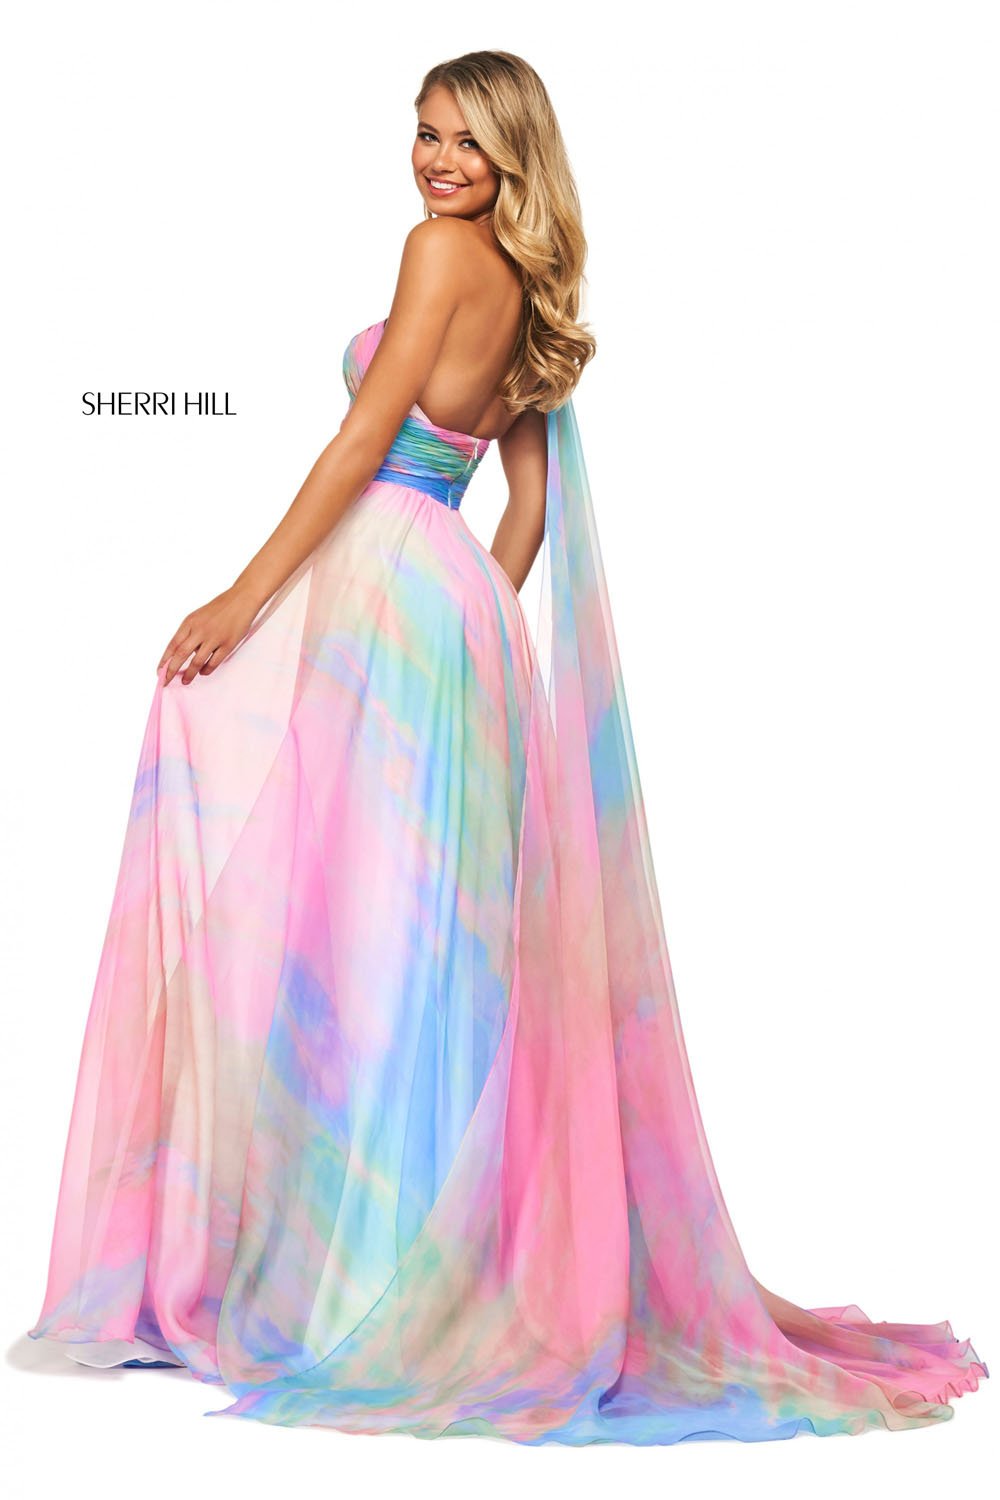 Sherri Hill 53768 dress images in these colors: Multi Print.